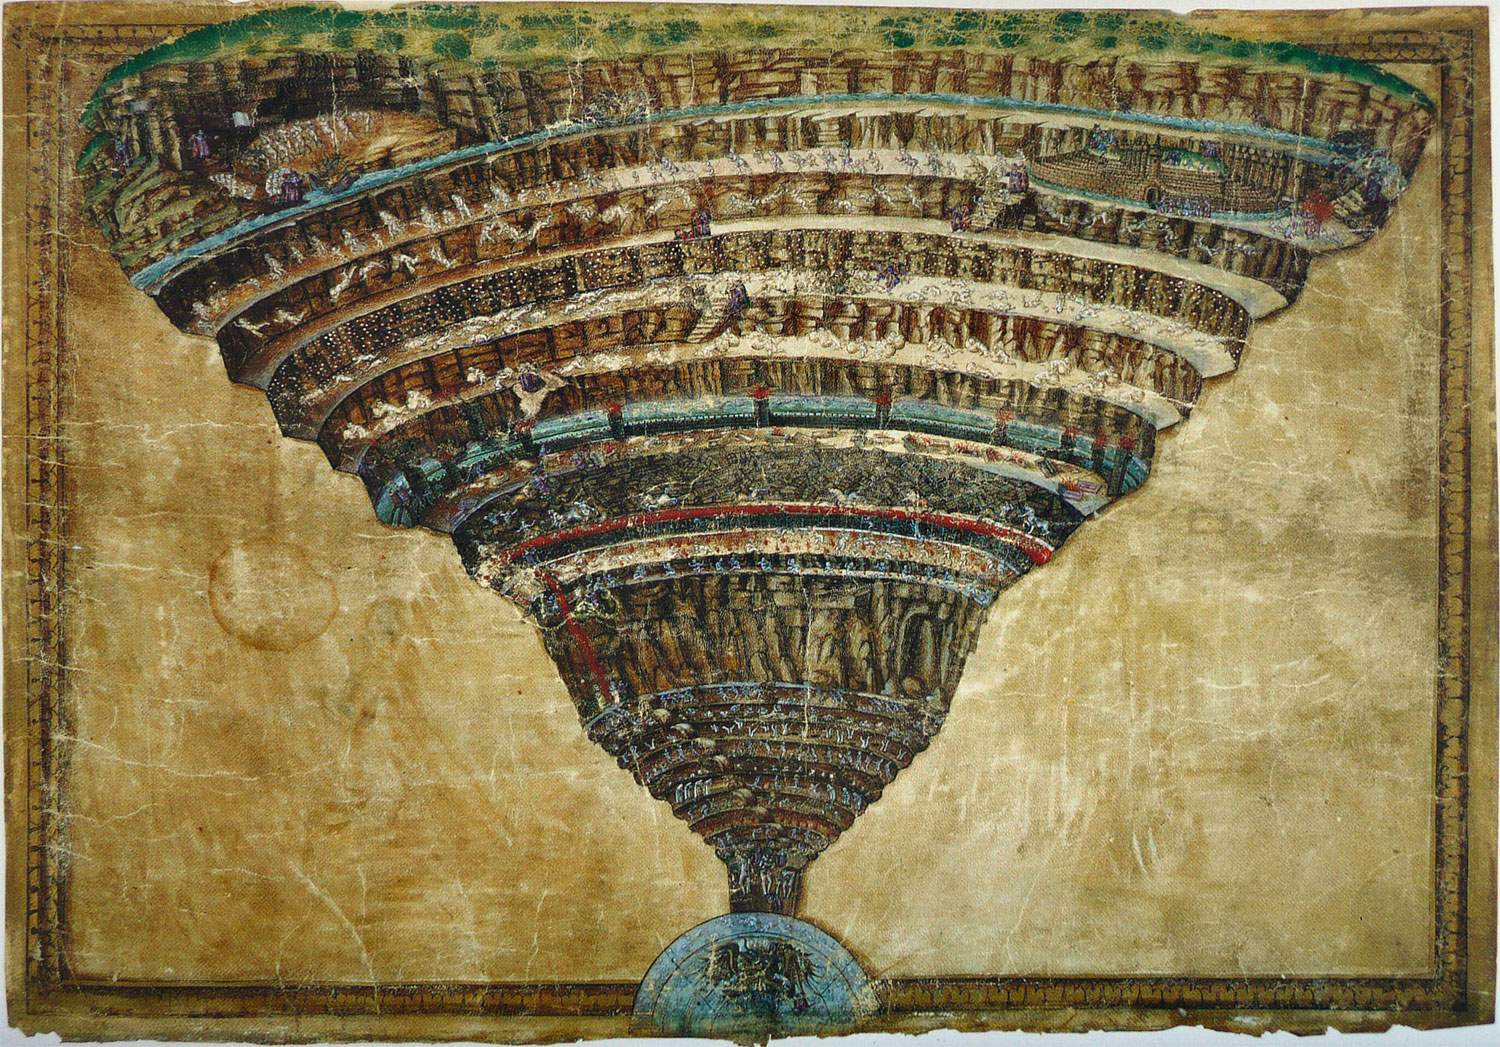 From Botticelli to Rodin, Dante's Inferno is on display at Rome's Scuderie del Quirinale